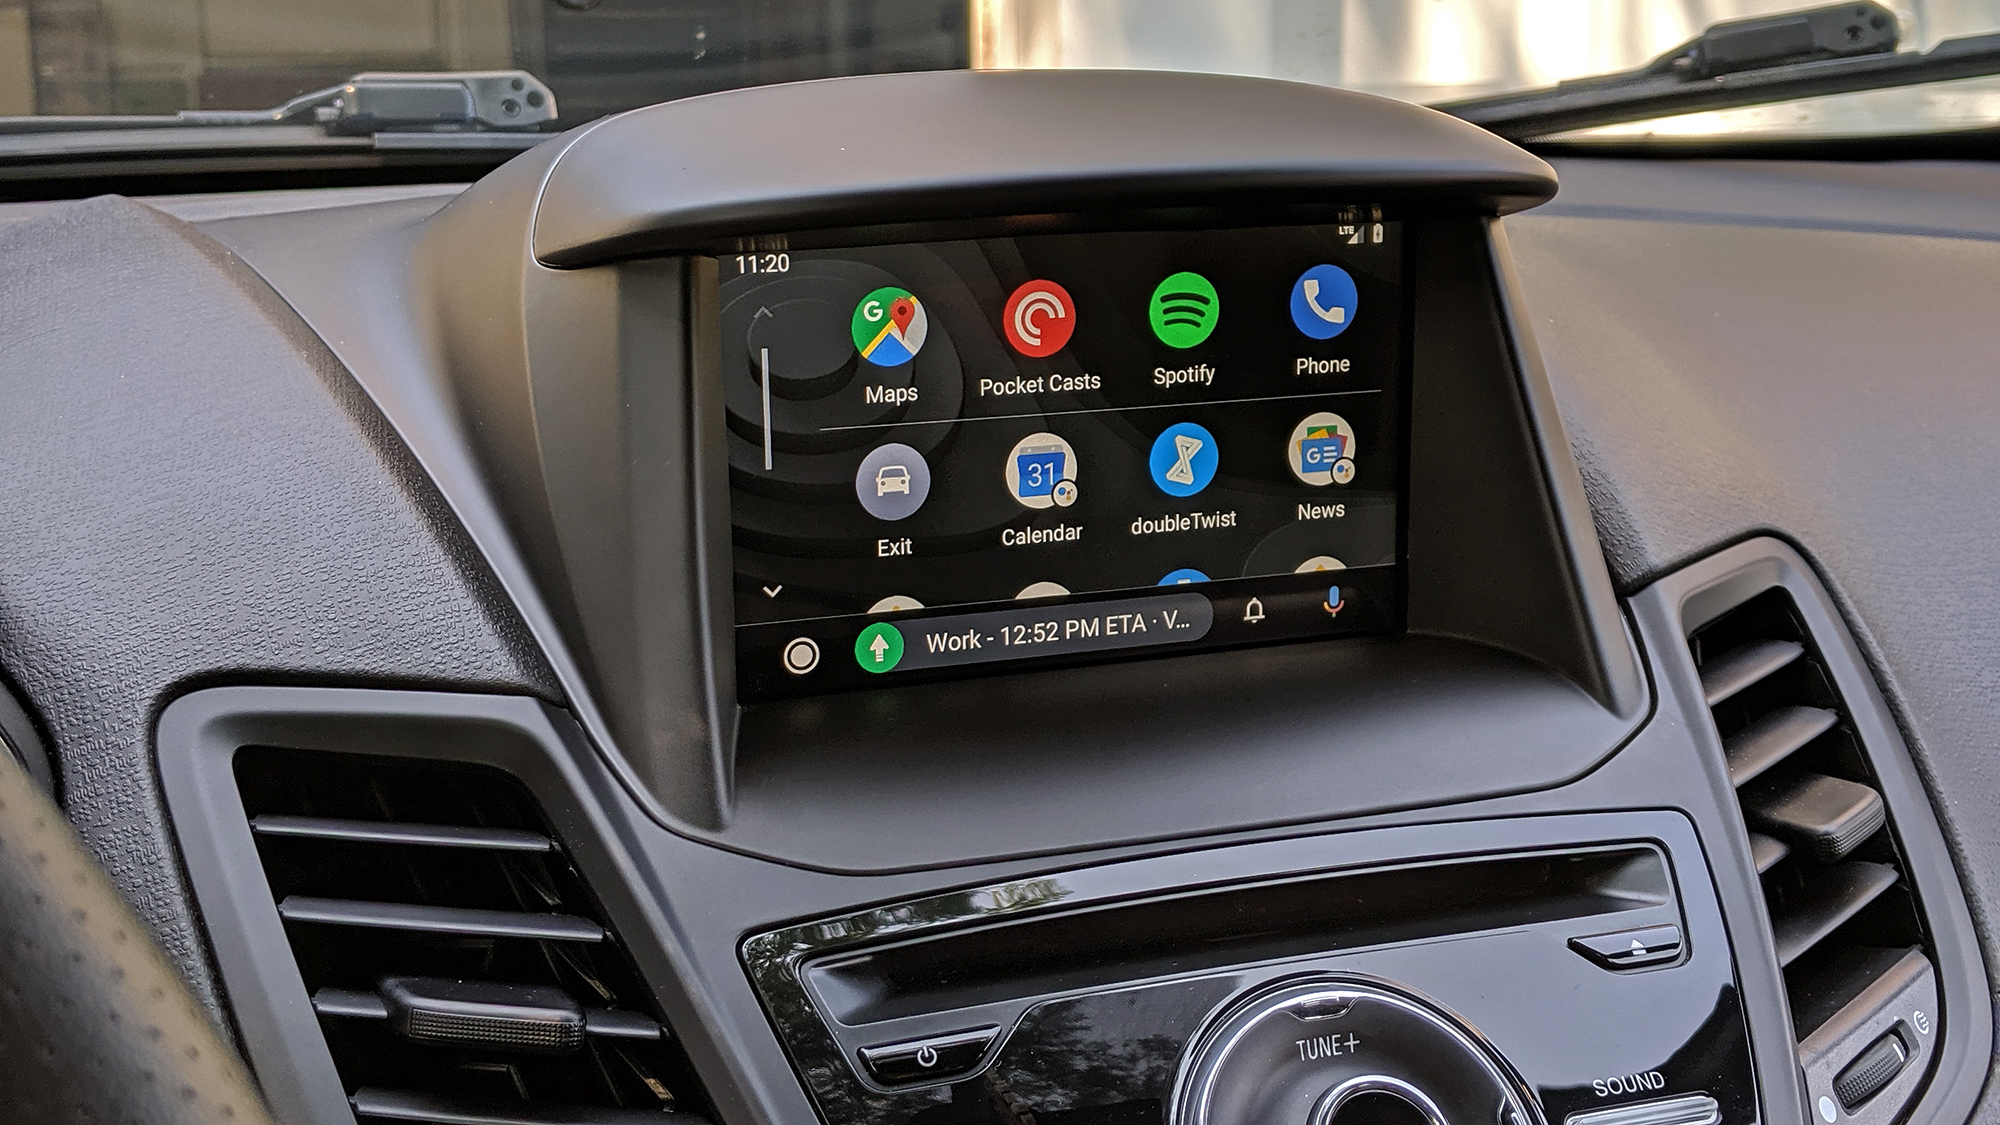 What's Android Auto, do you need it in the car, and how does it work?